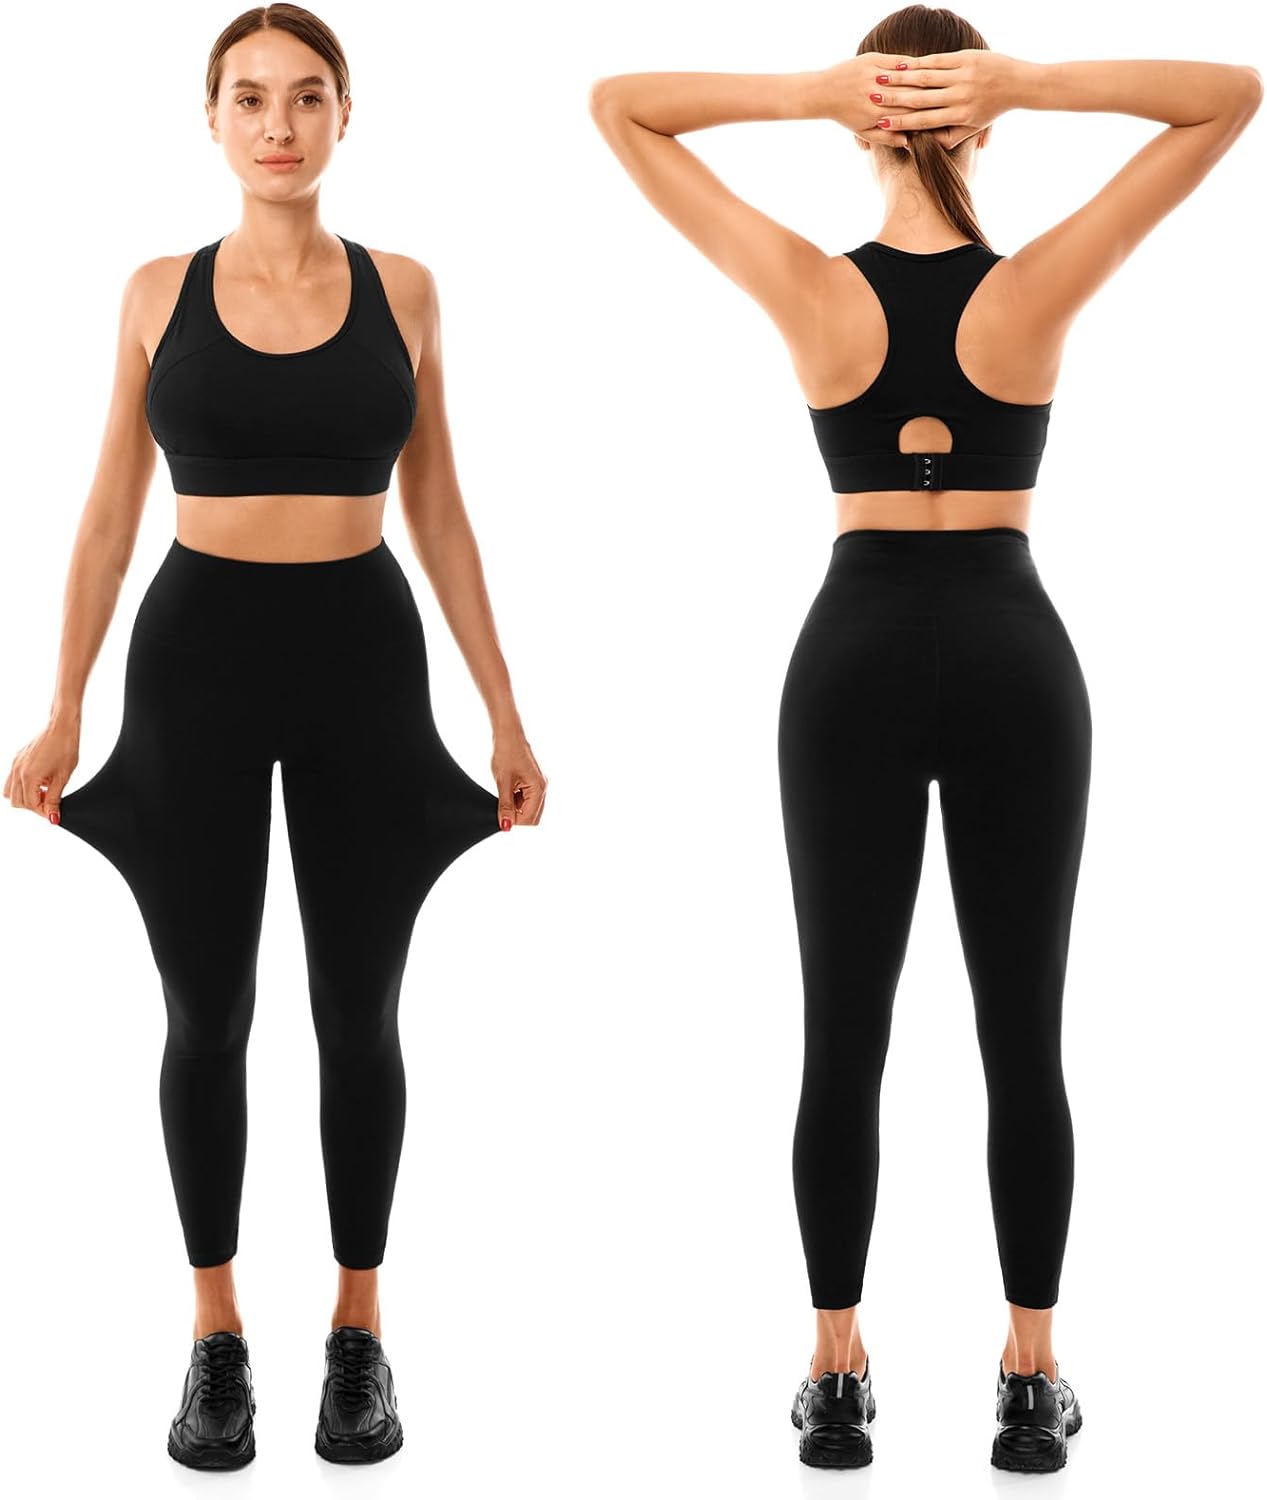 Walifrey Leggings for Women, High Waisted Buttery Soft Womens Leggings for Gym Yoga Workout